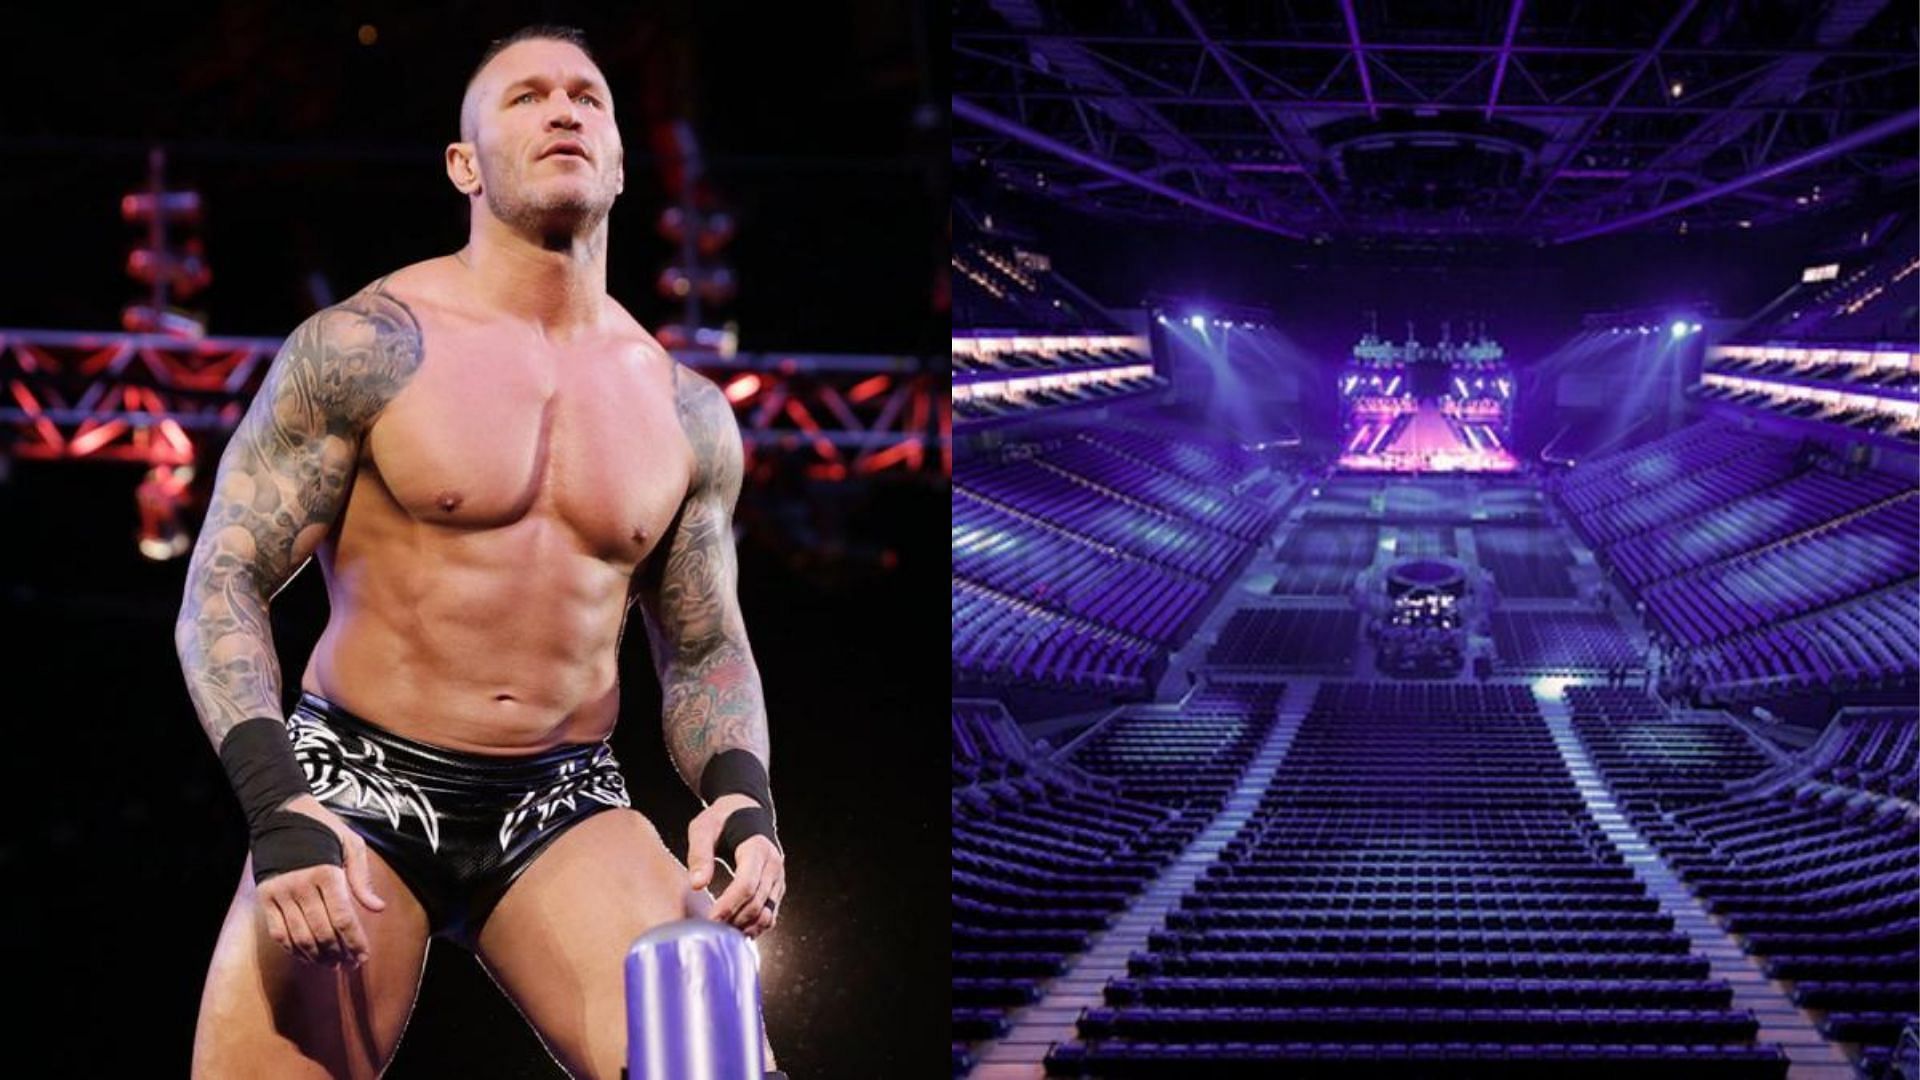 WWE fans at the 02 arena witnessed some thrilling action